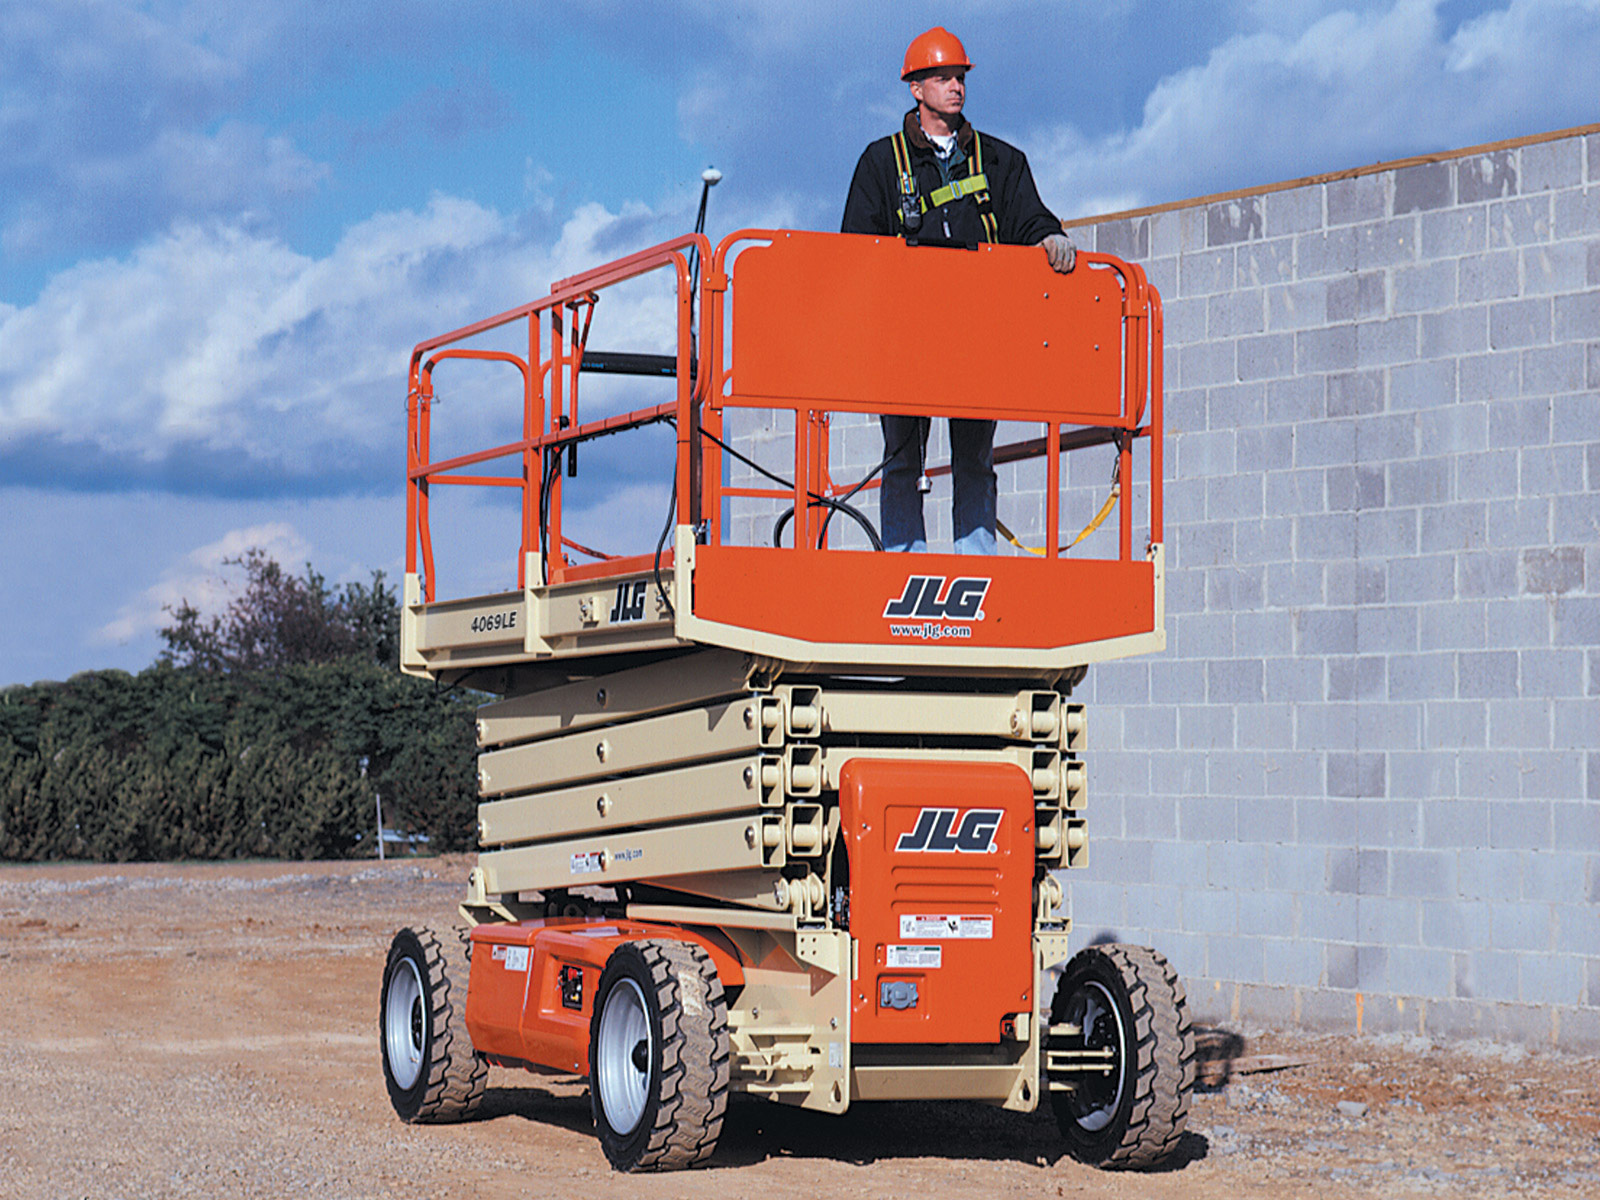 New or Used Rental JLG 4069LE   | lift truck rental for sale | National Lift of Arkansas